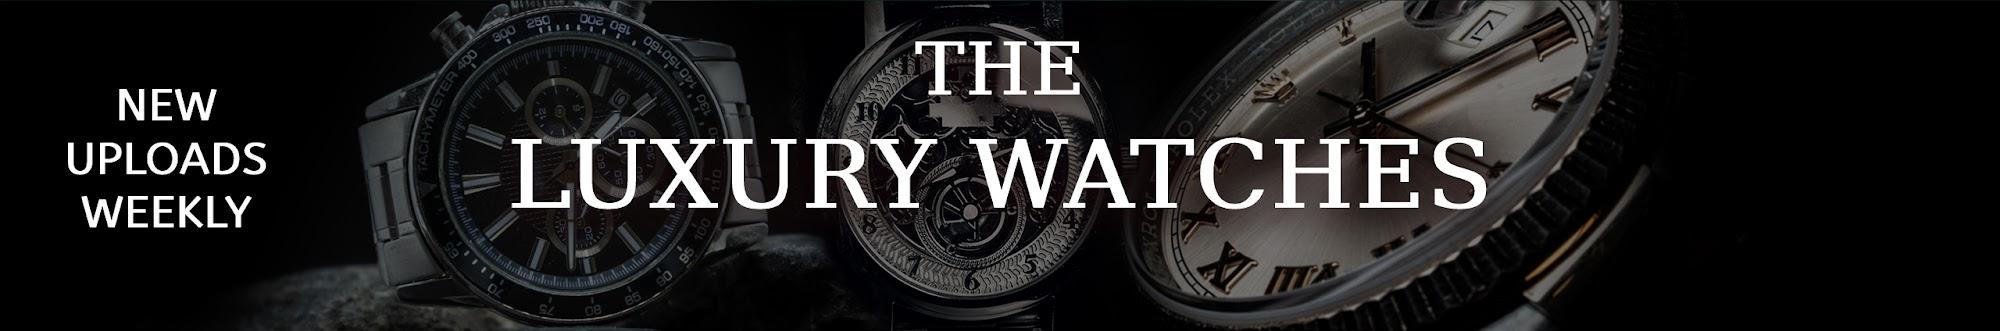 The Luxury Watches